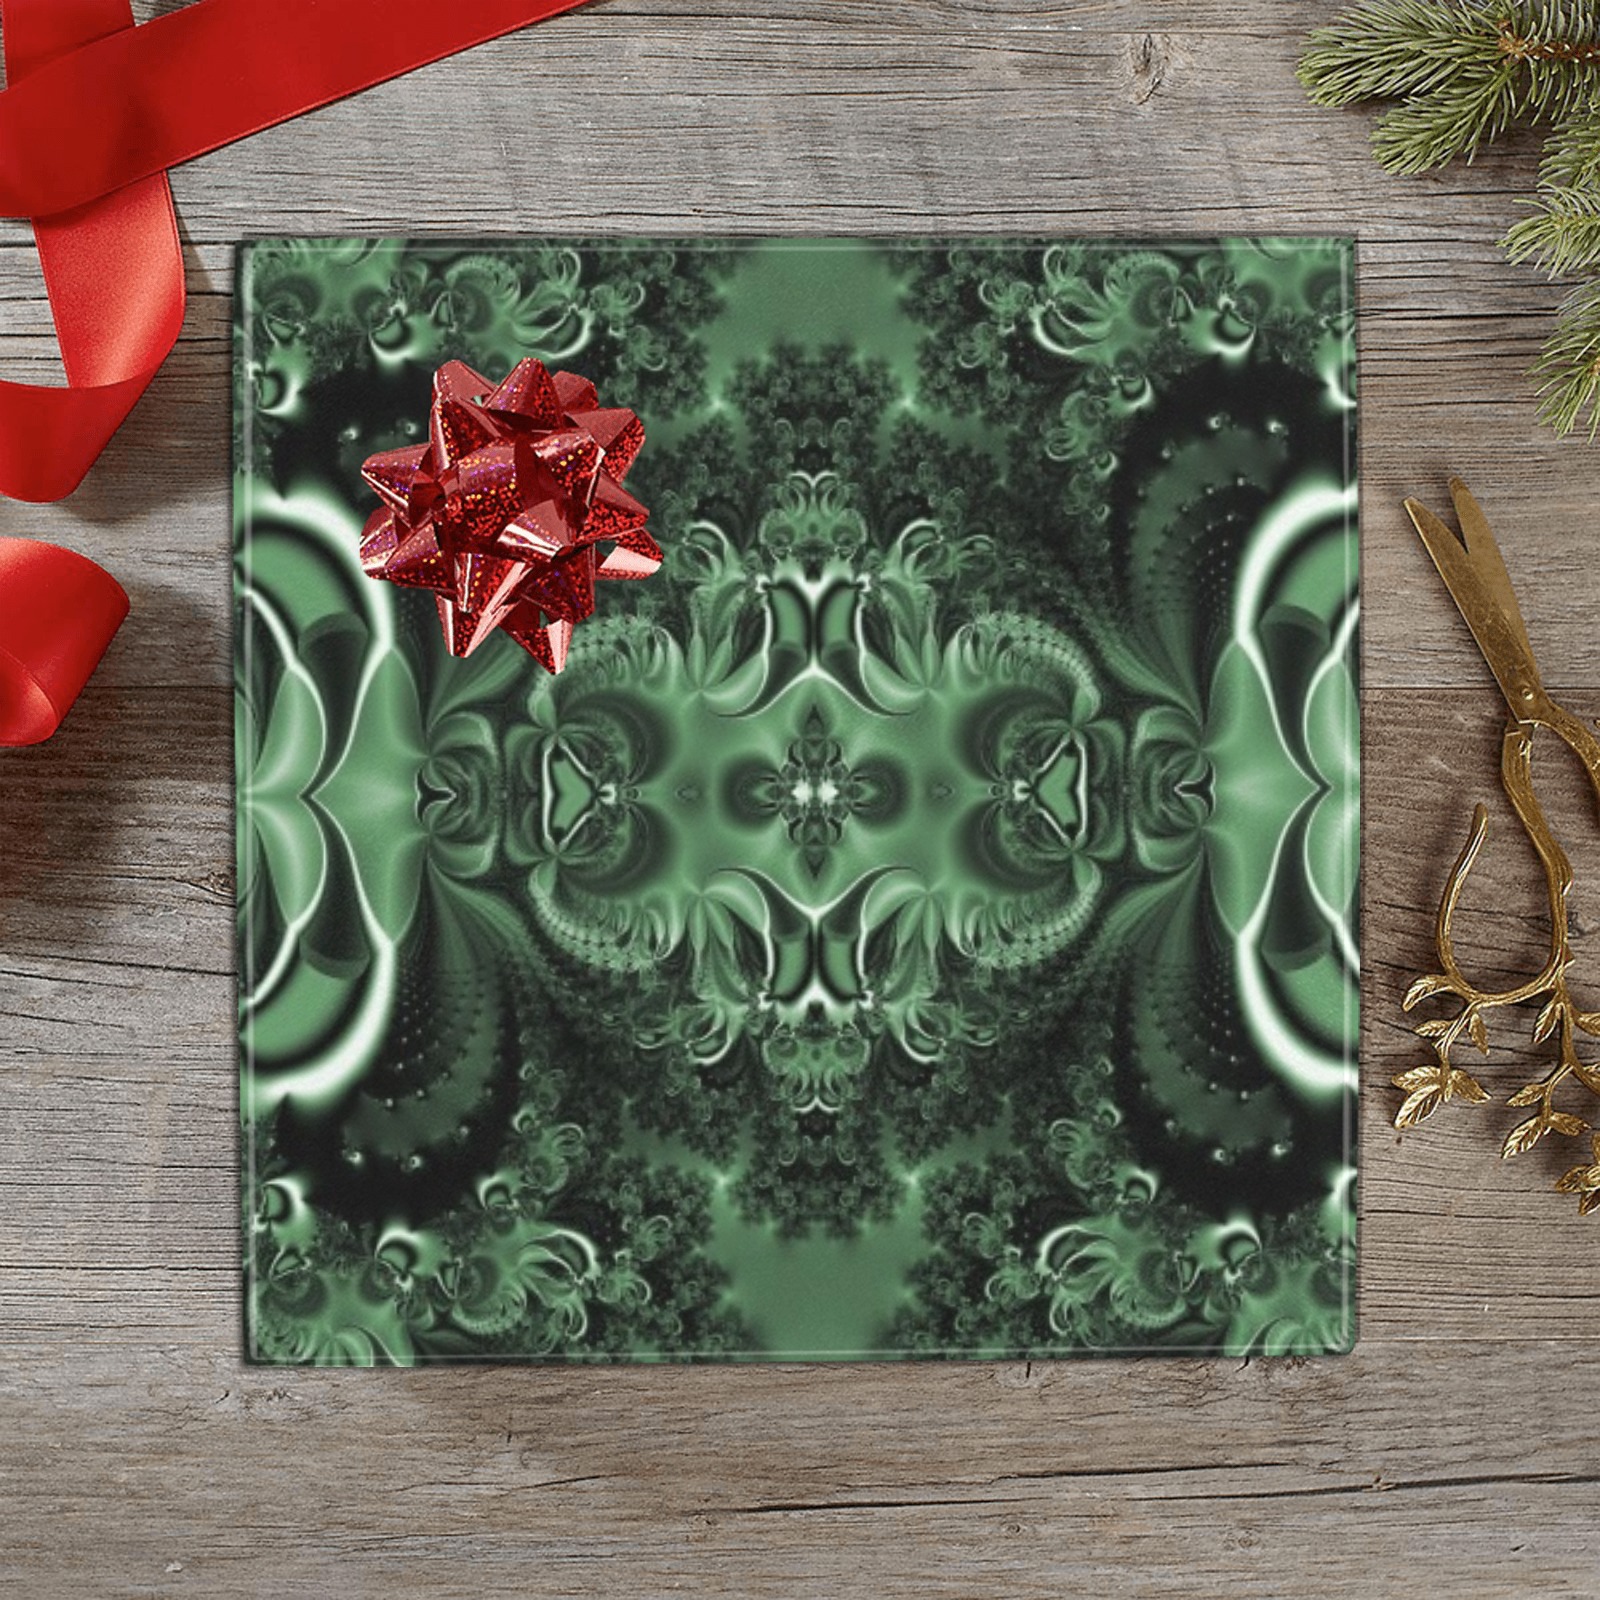 Deep in the Forest Frost Fractal Gift Wrapping Paper 58"x 23" (2 Rolls)